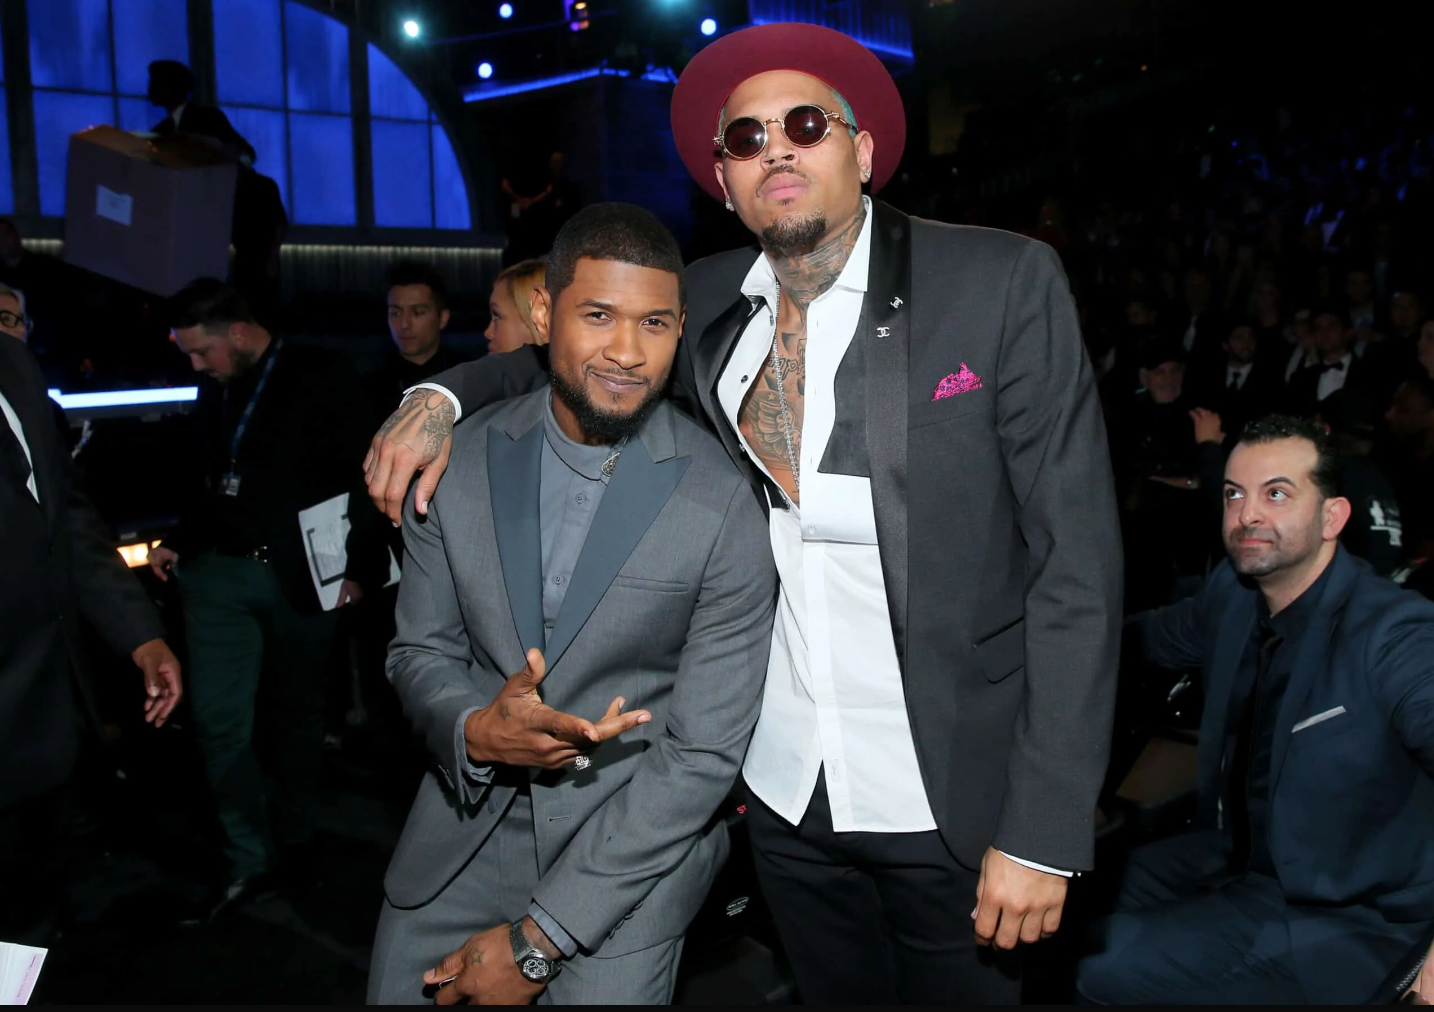 Usher And Chris Brown Performed At ‘Lovers & Friends’ Music Festival After Allegedly Fighting